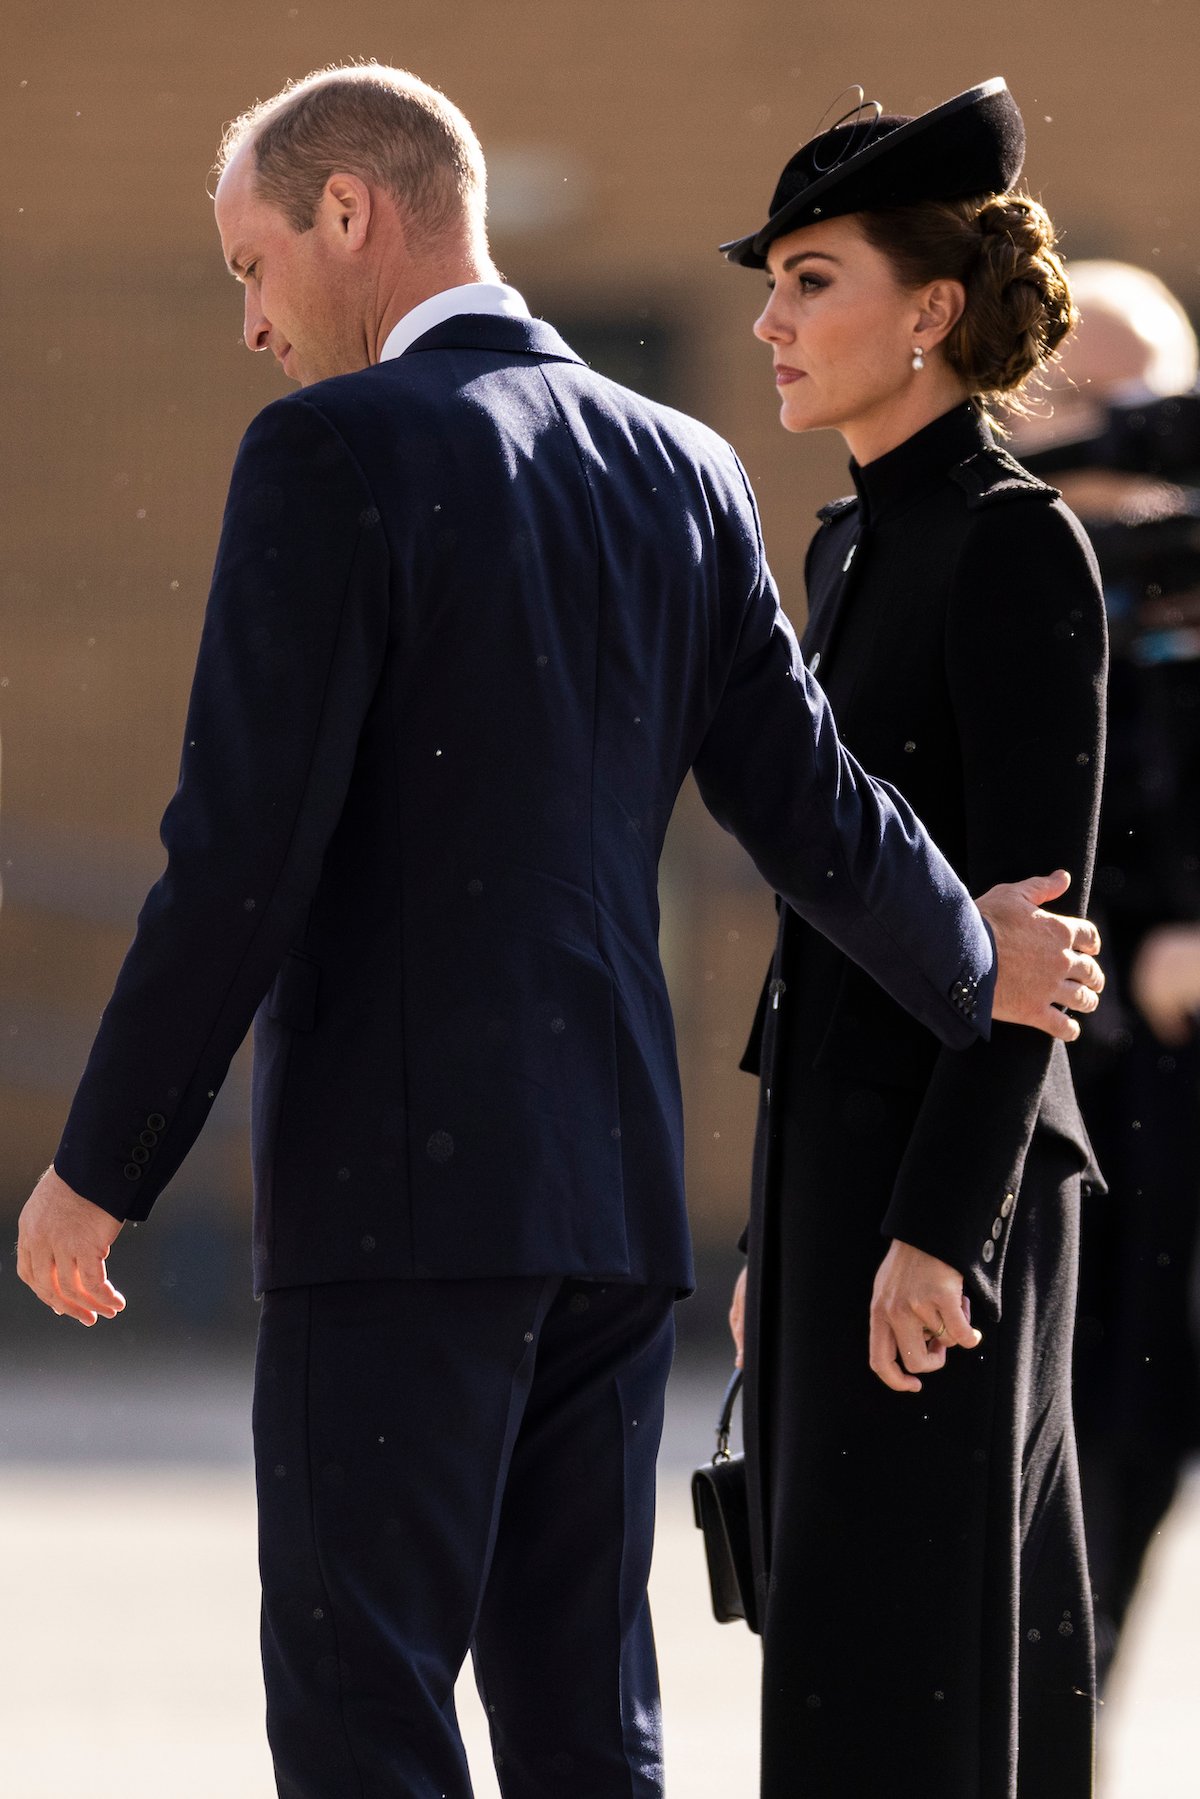 Prince William touches Kate Middleton during a Sept. 16 visit to see troops ahead of Queen Elizabeth's funeral during which a body language expert described Prince William and Kate Middleton as 'unusually tactile.'